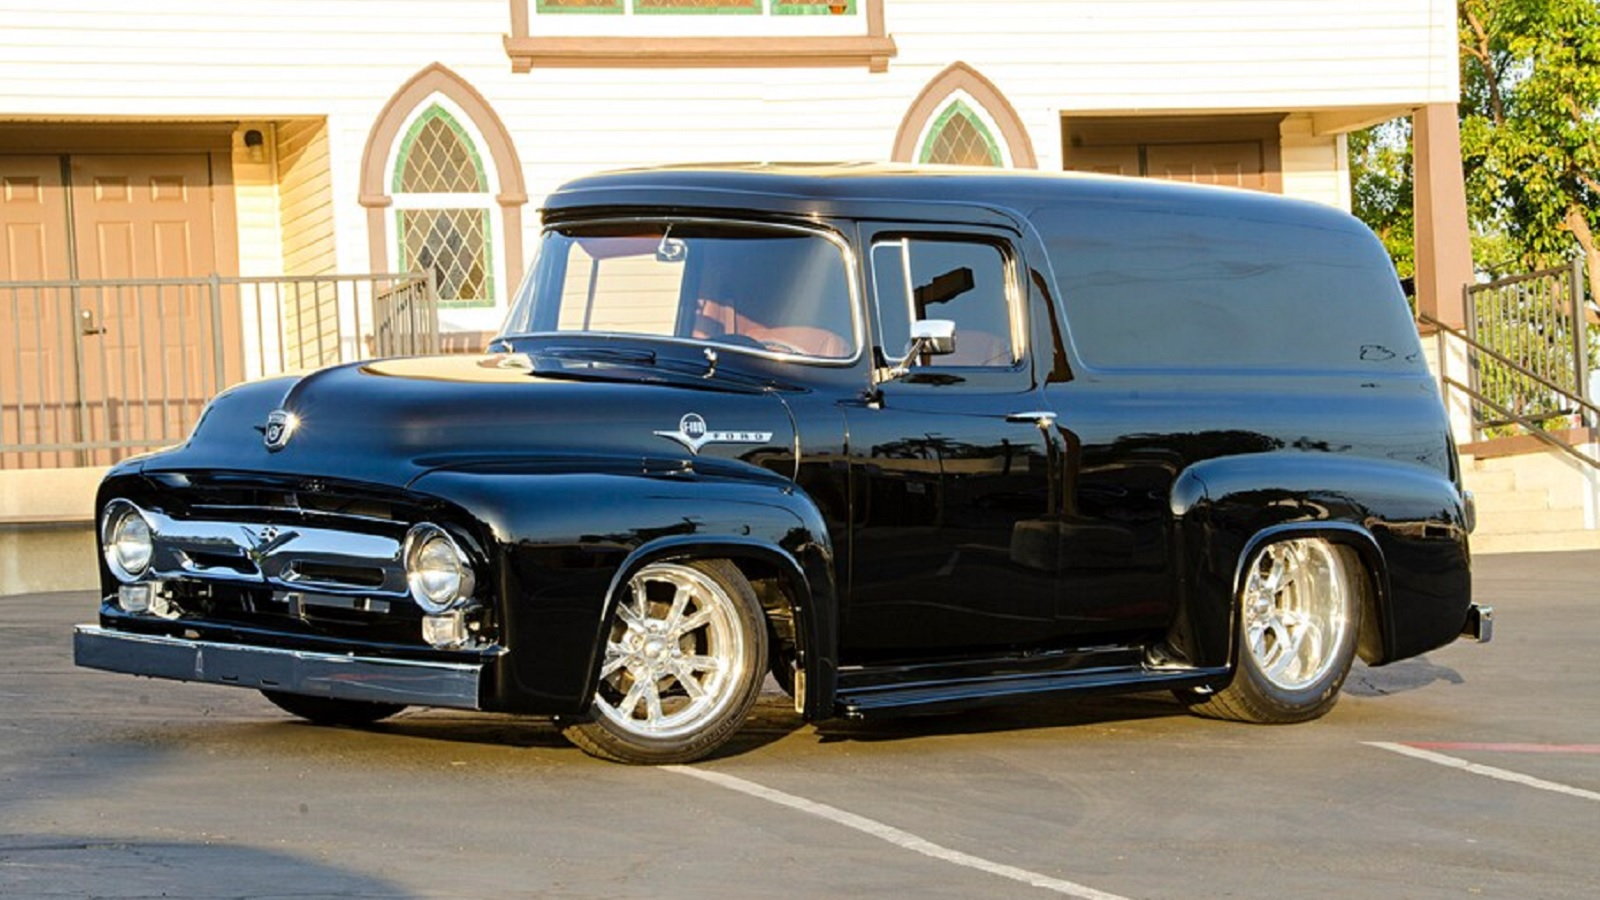 1956 Ford F-100 Panel Van is a Top 